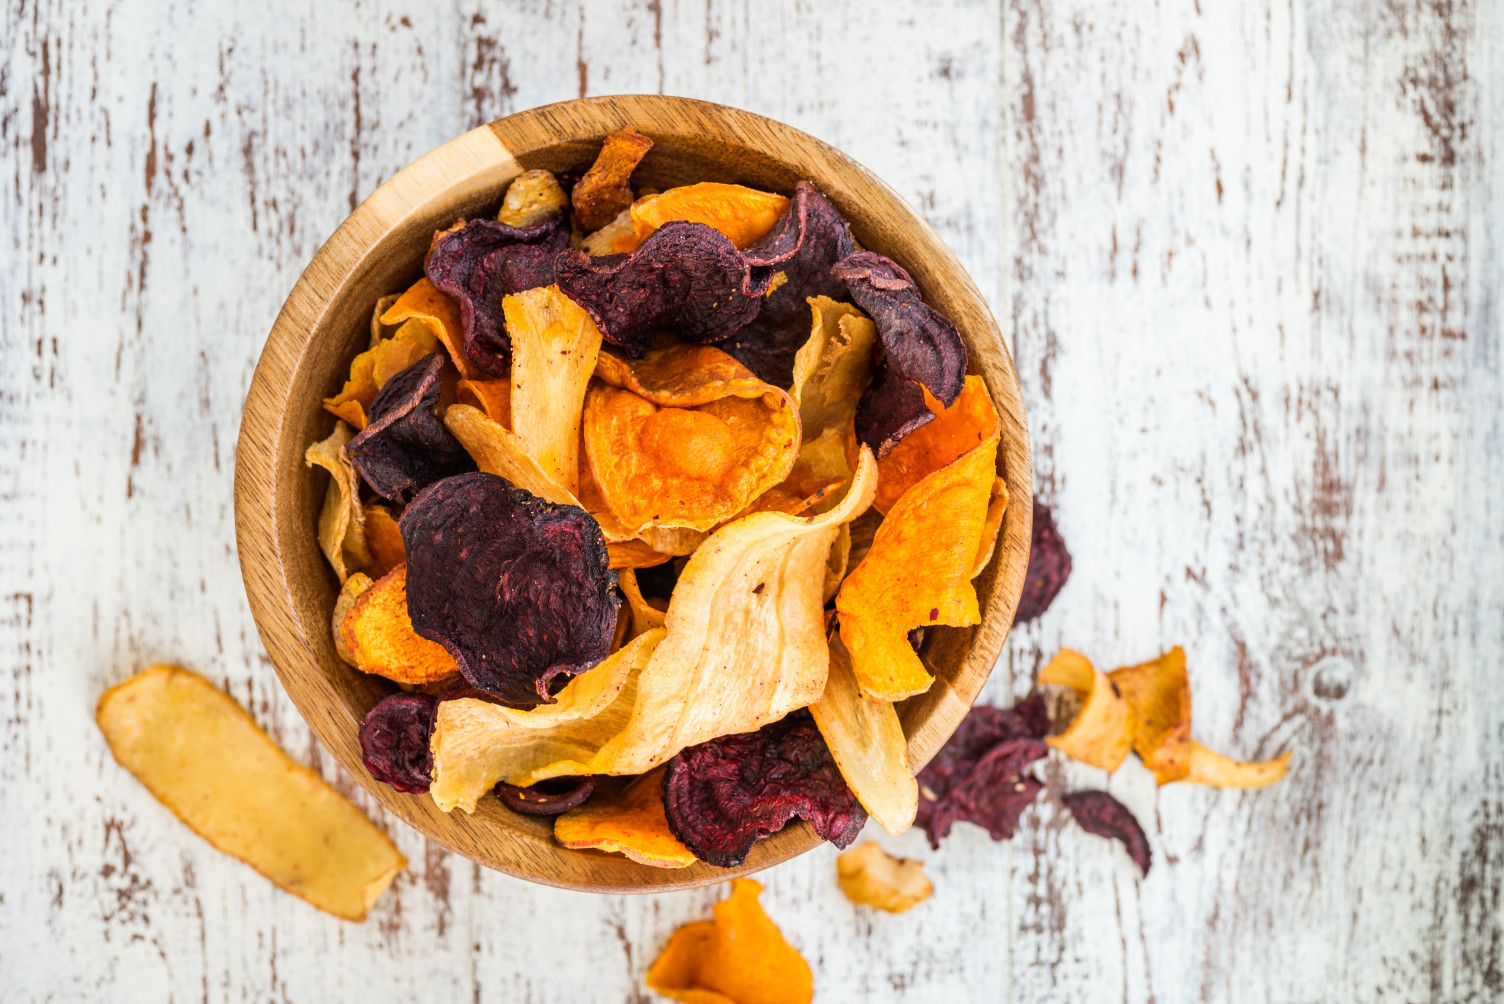 A bowl of root vegetable crisps, made with parsnips, beetroot, carrots and sweet potatoes